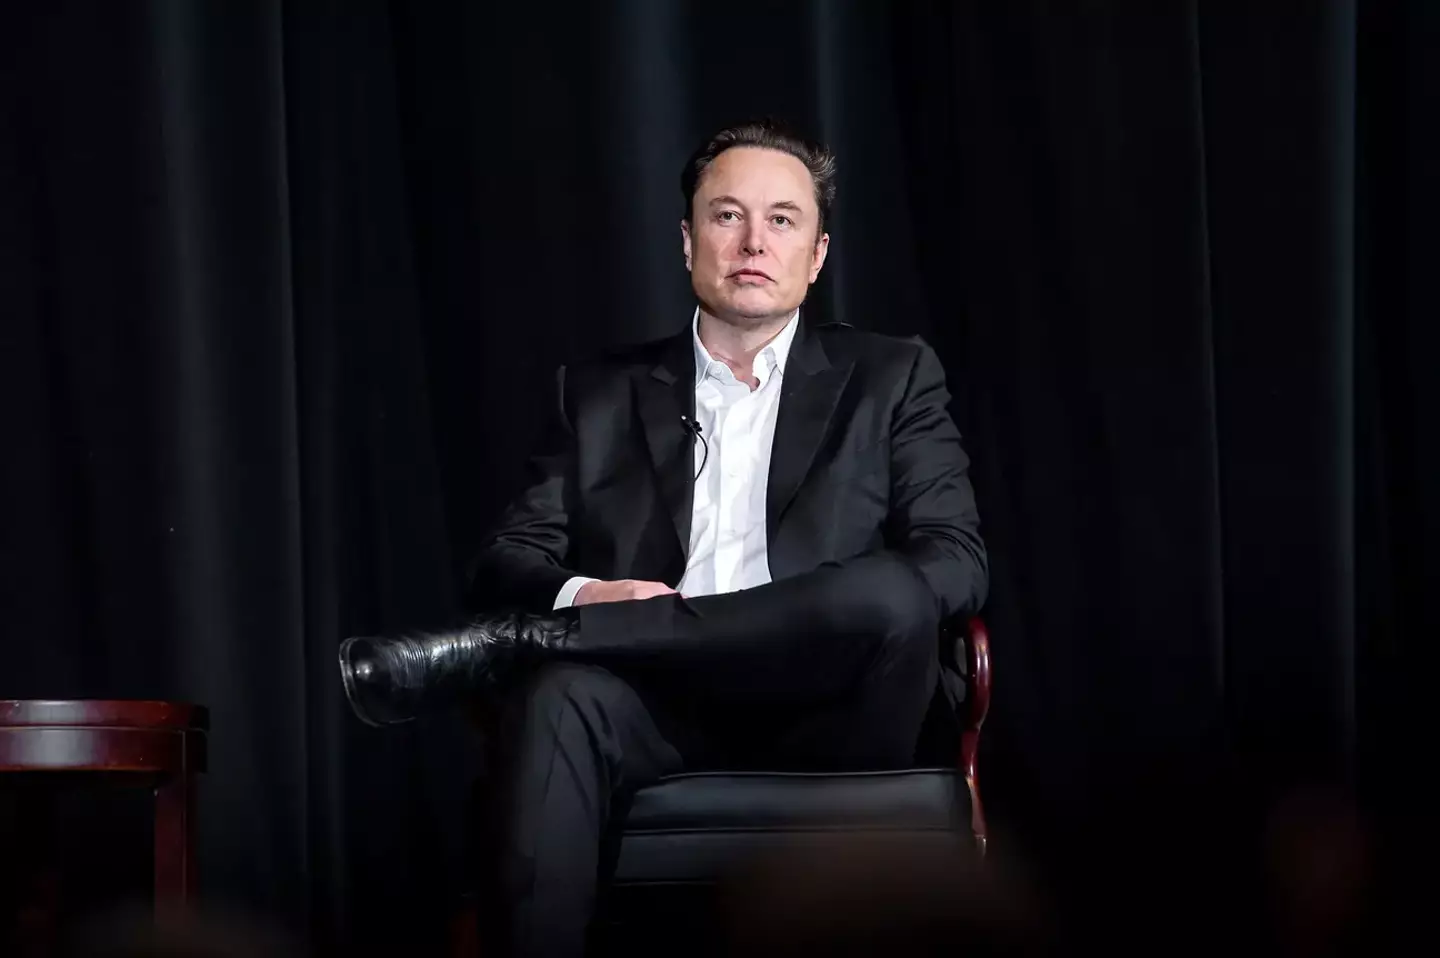 The Elon Musk-owned company has faced losses over the past year.